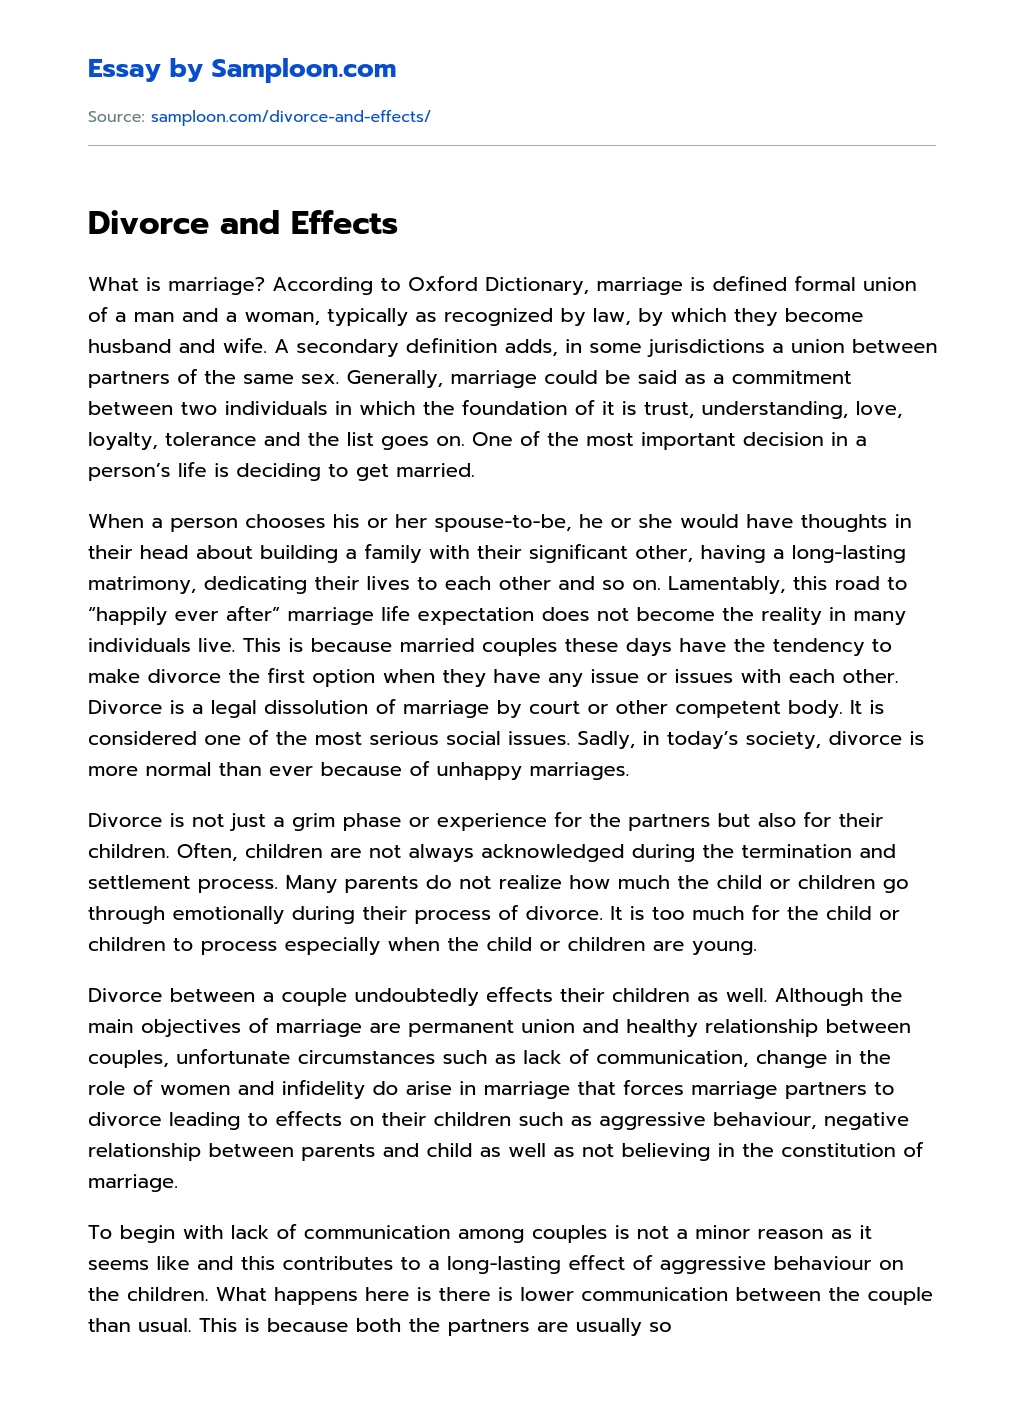 essay about effect of divorce